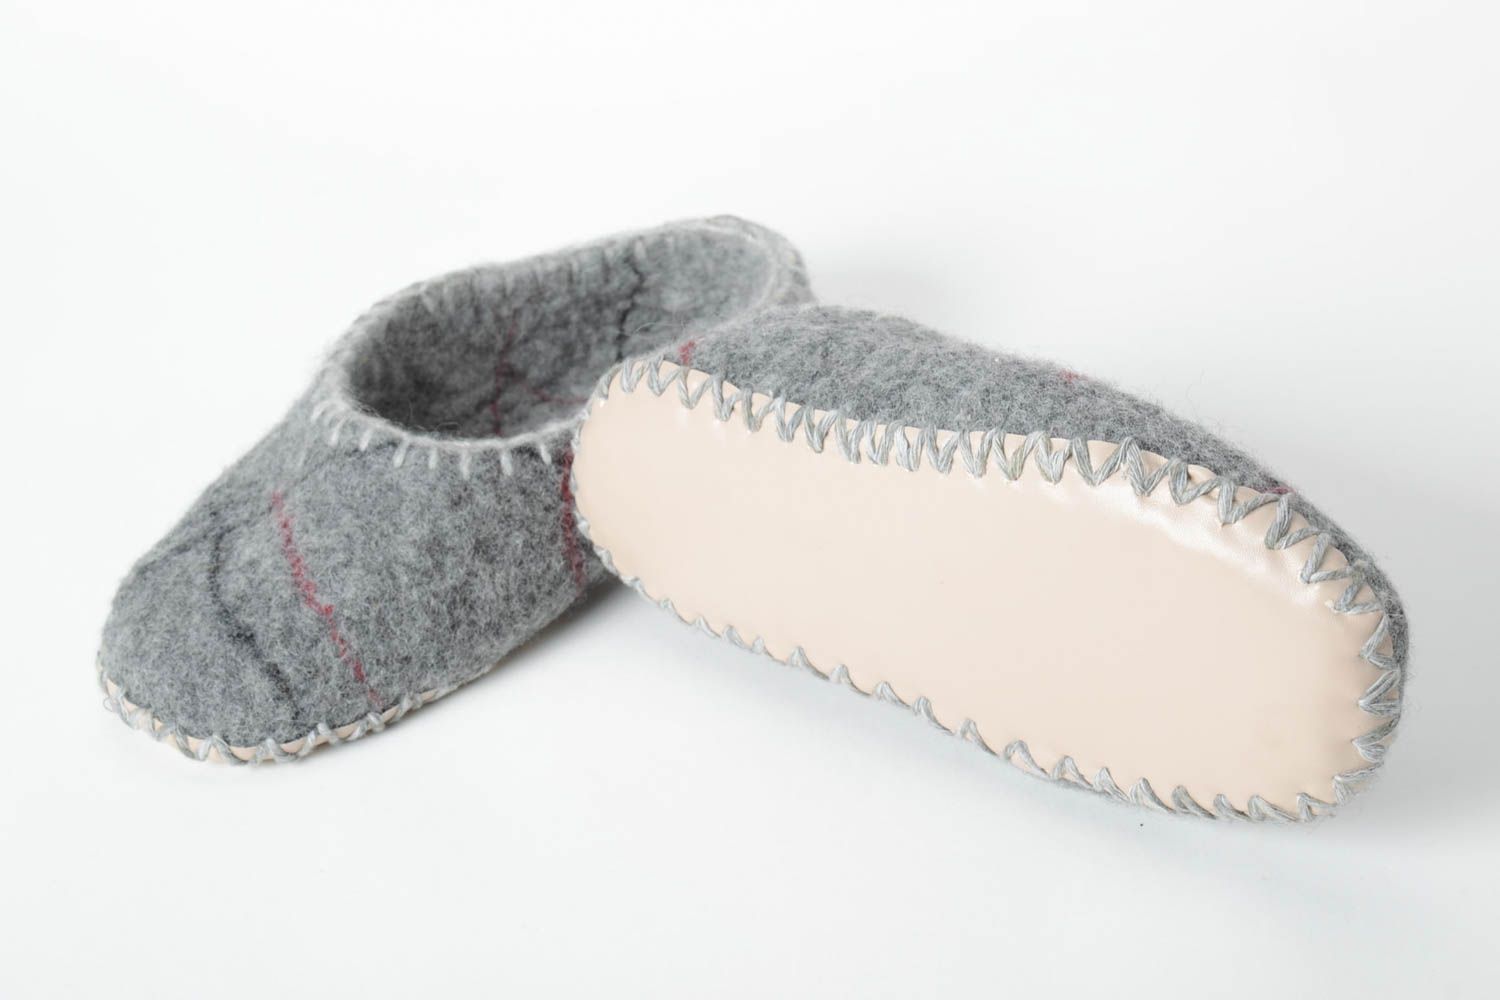 Handmade woolen slippers warm shoes for home unusual cute grey slippers photo 4